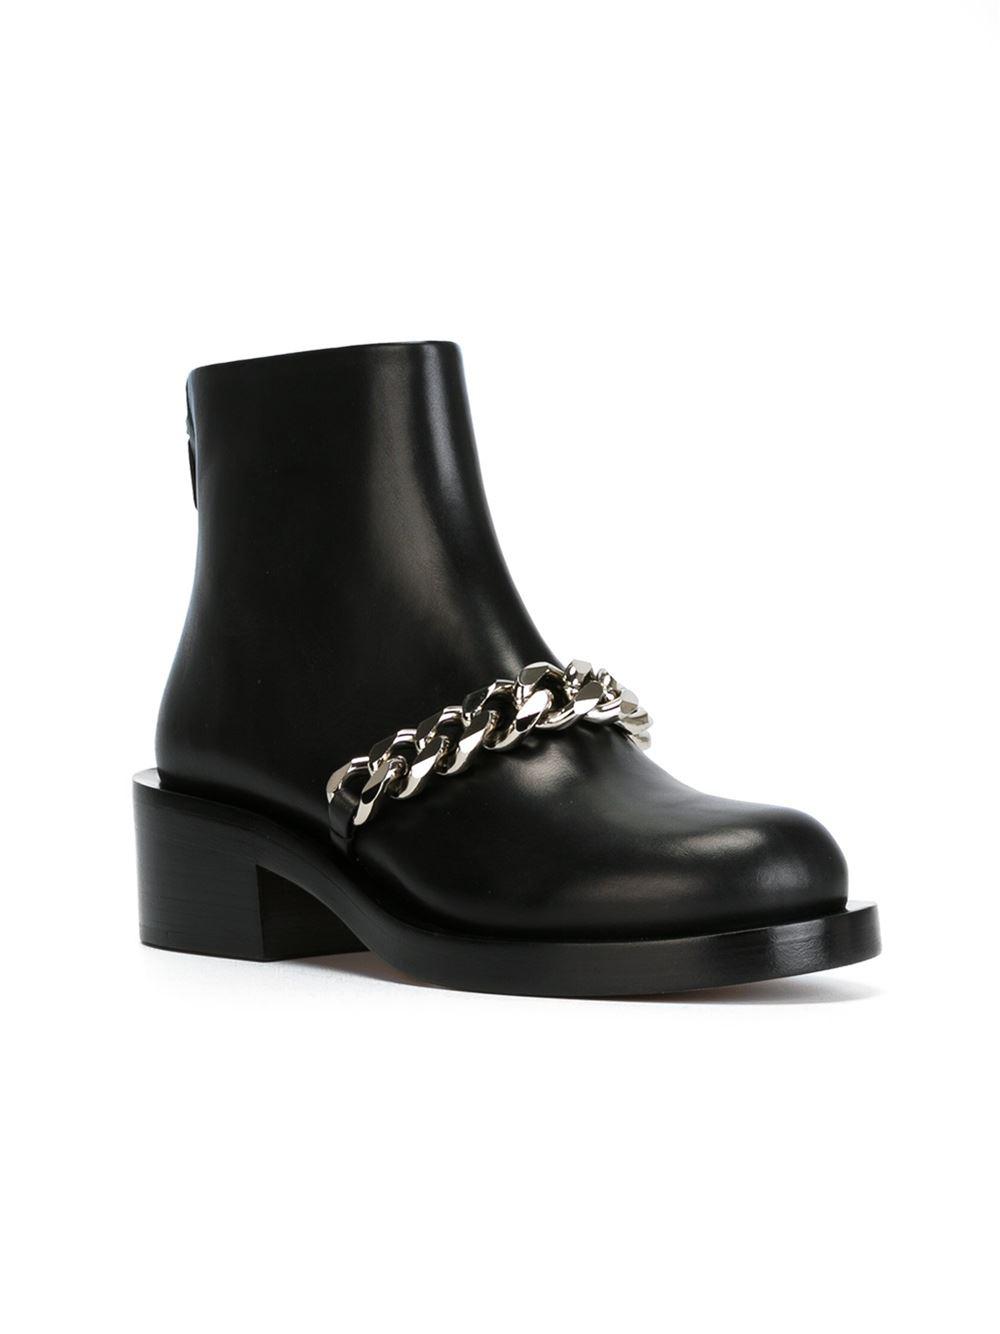 Givenchy Leather Chain Strap Ankle Boot in White (Black) - Lyst